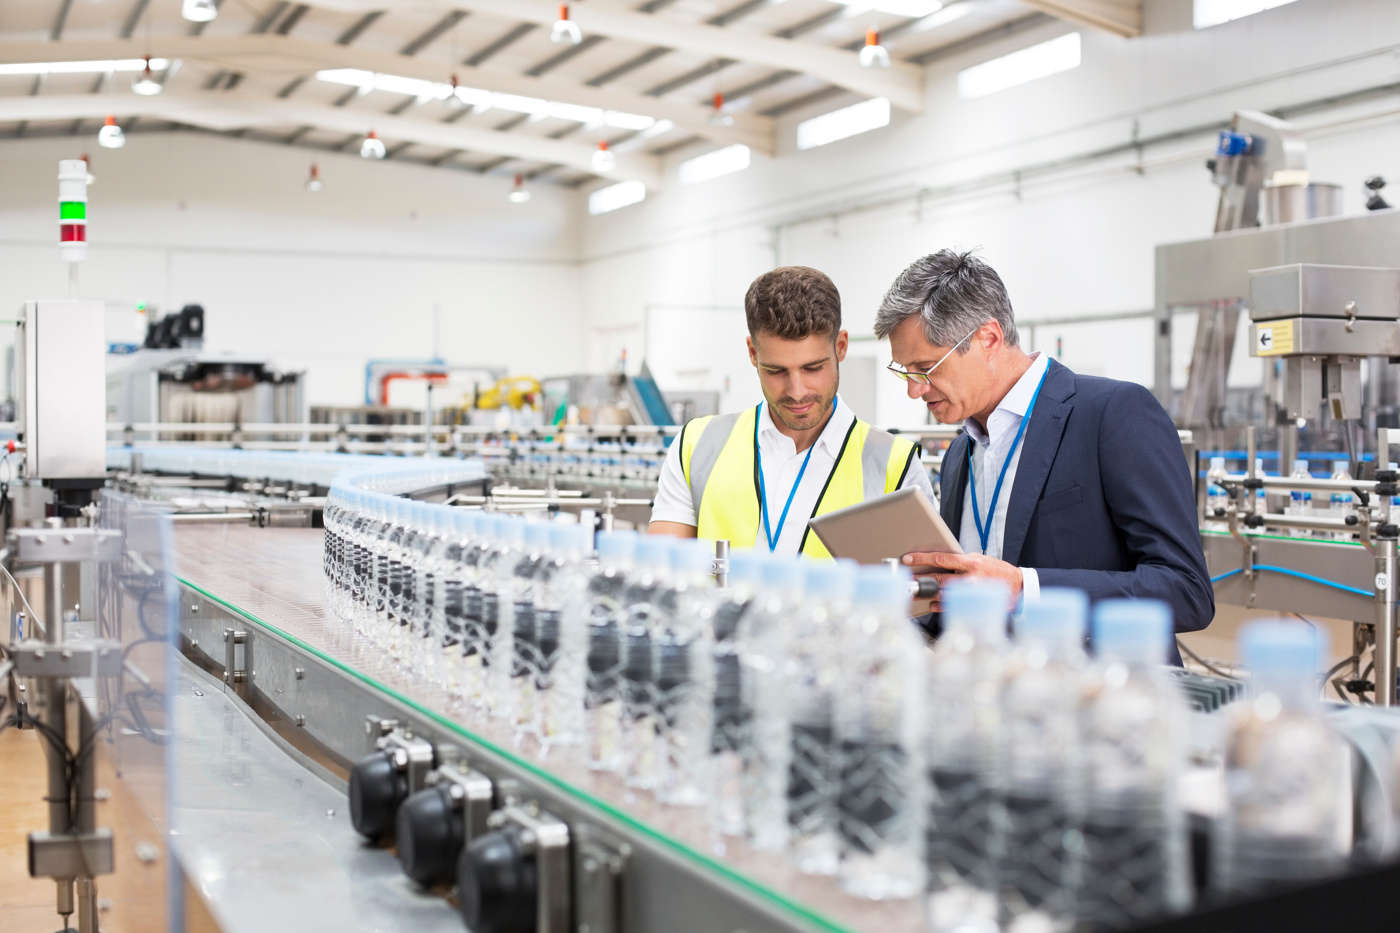 Quality managers check the quality assurance measures in a water bottle production facility.